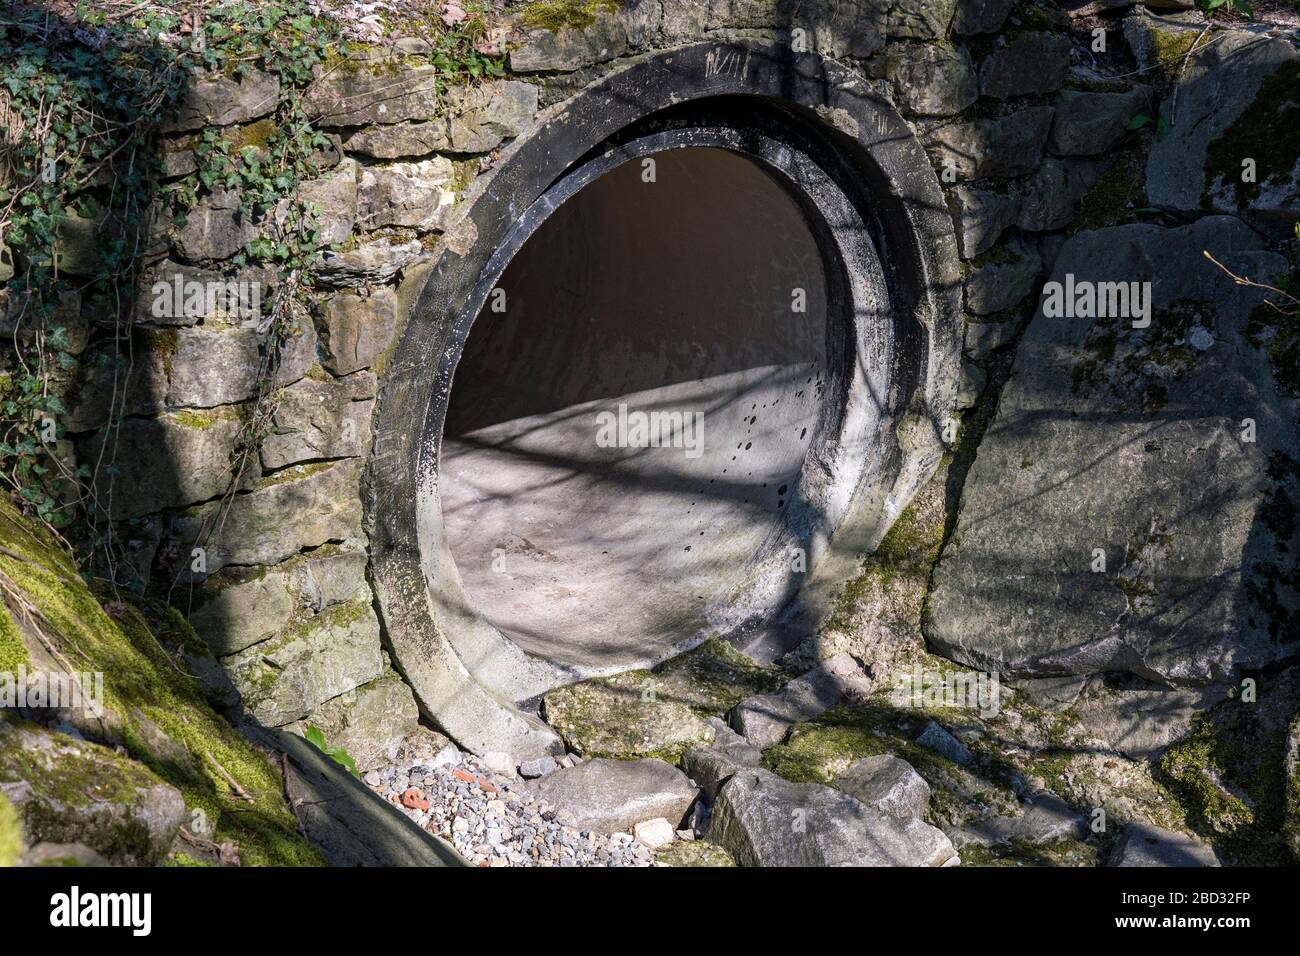 Sewer with large opening and stone wall Stock Photo